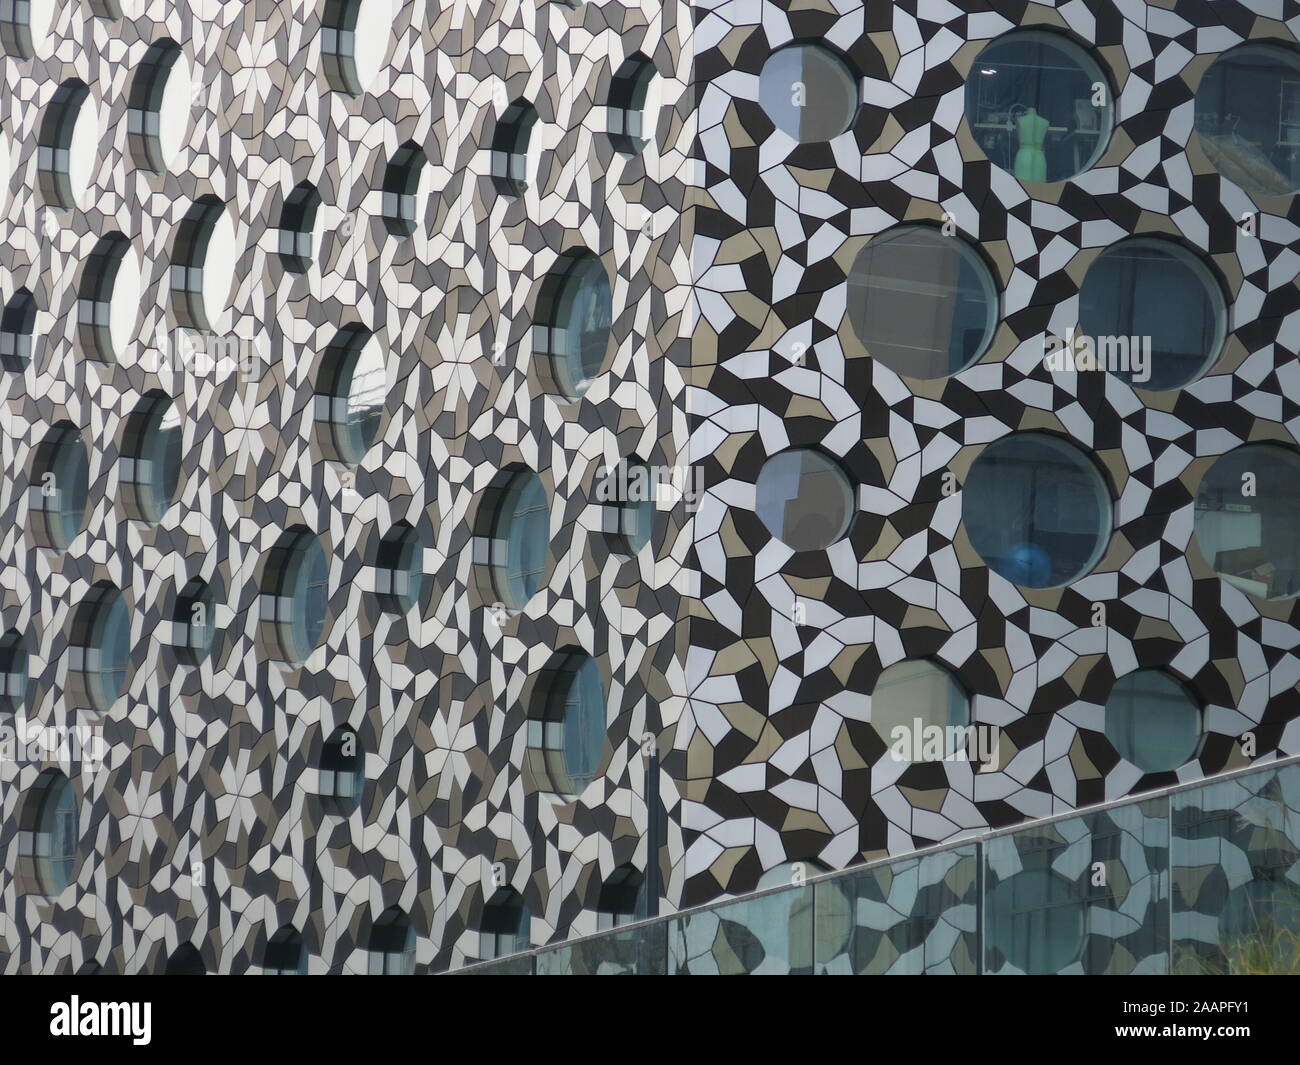 Façade of an eye-catching building at Greenwich, with circular windows and an abstract geometric pattern on the exterior cladding. Stock Photo